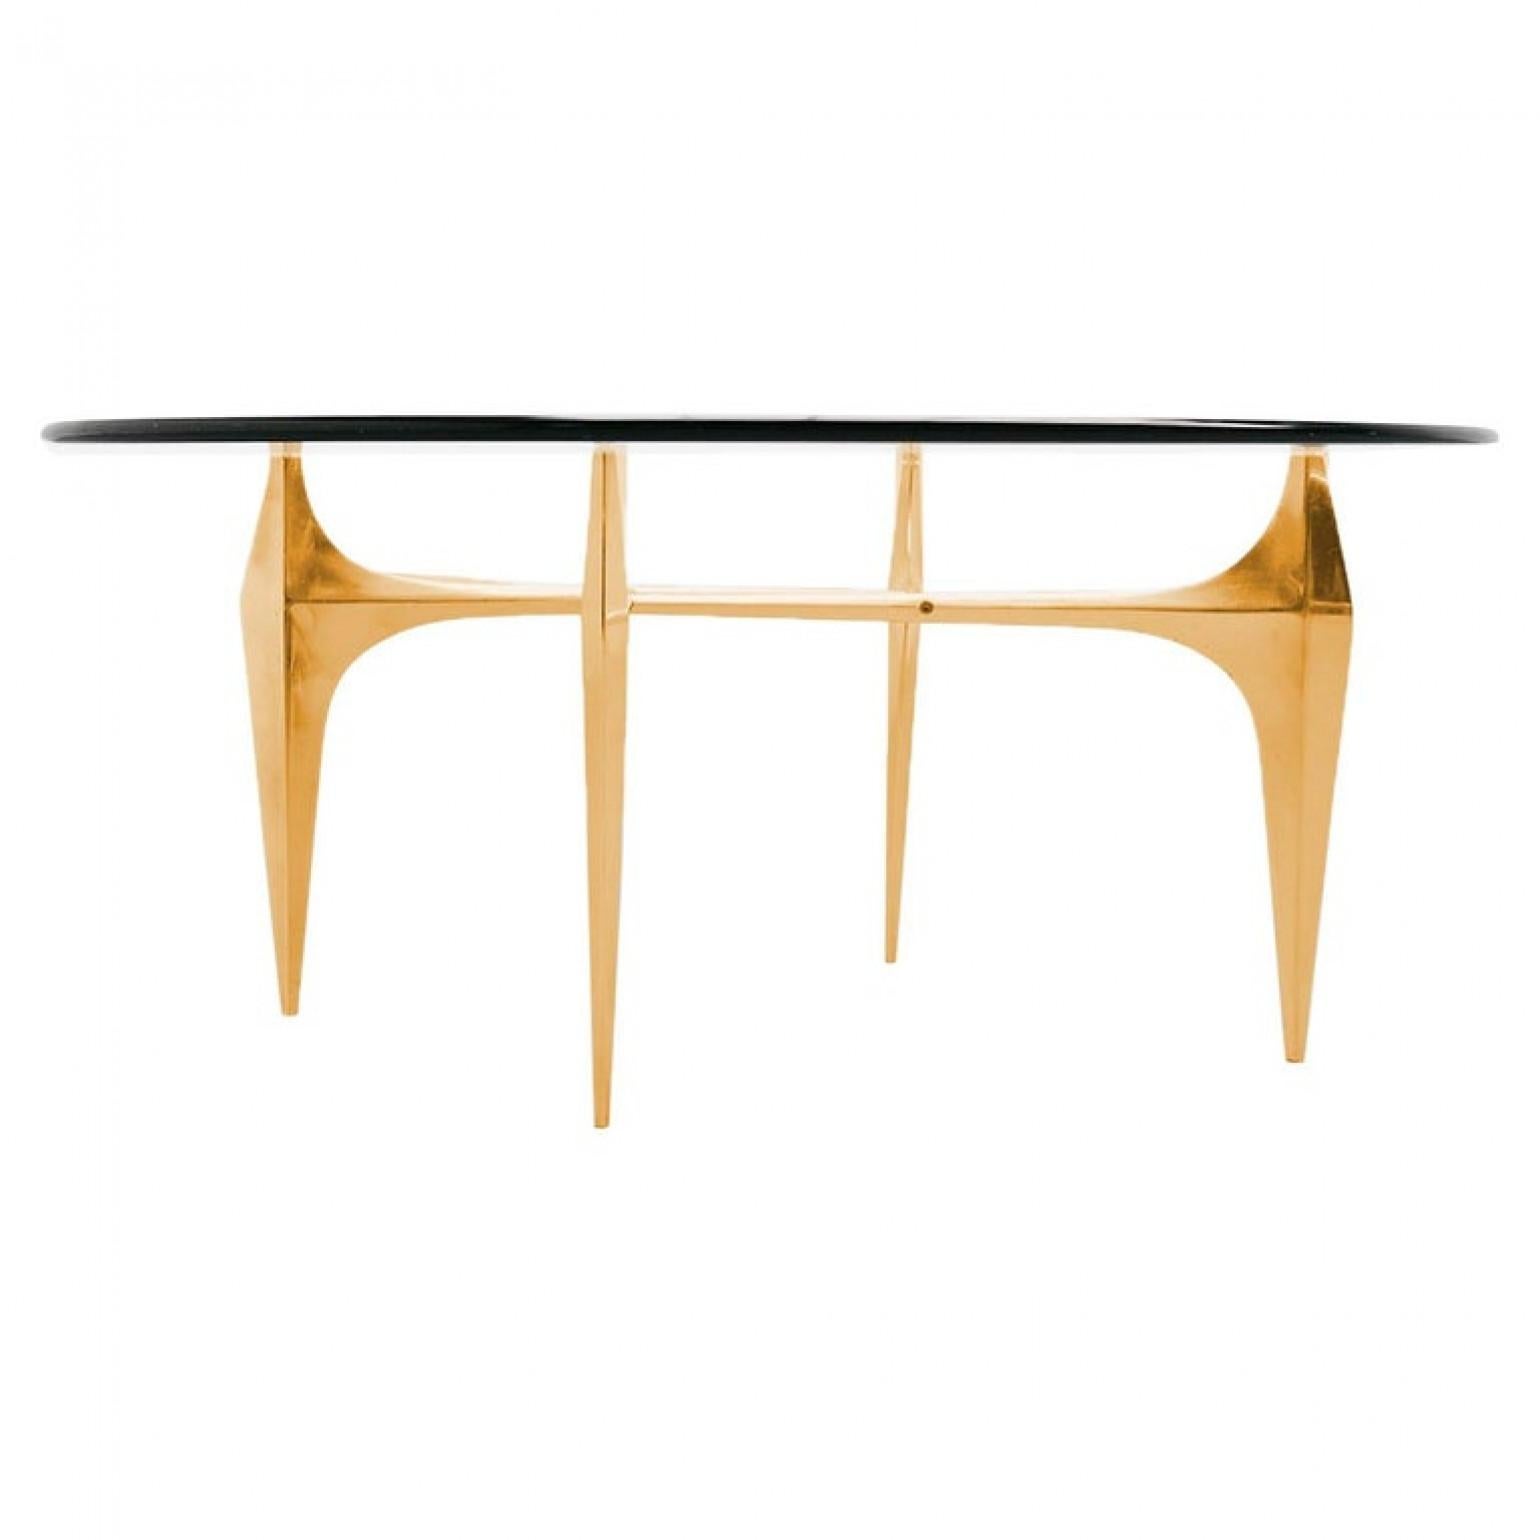 Sculptural coffee or cocktail table by Knut Hesterberg produced by Ronald Schmitt, Germany, circa 1960 and composed of expressive brass parts. An iconic design from the 1960s and still relevant today.

Very good condition with small traces of usage.